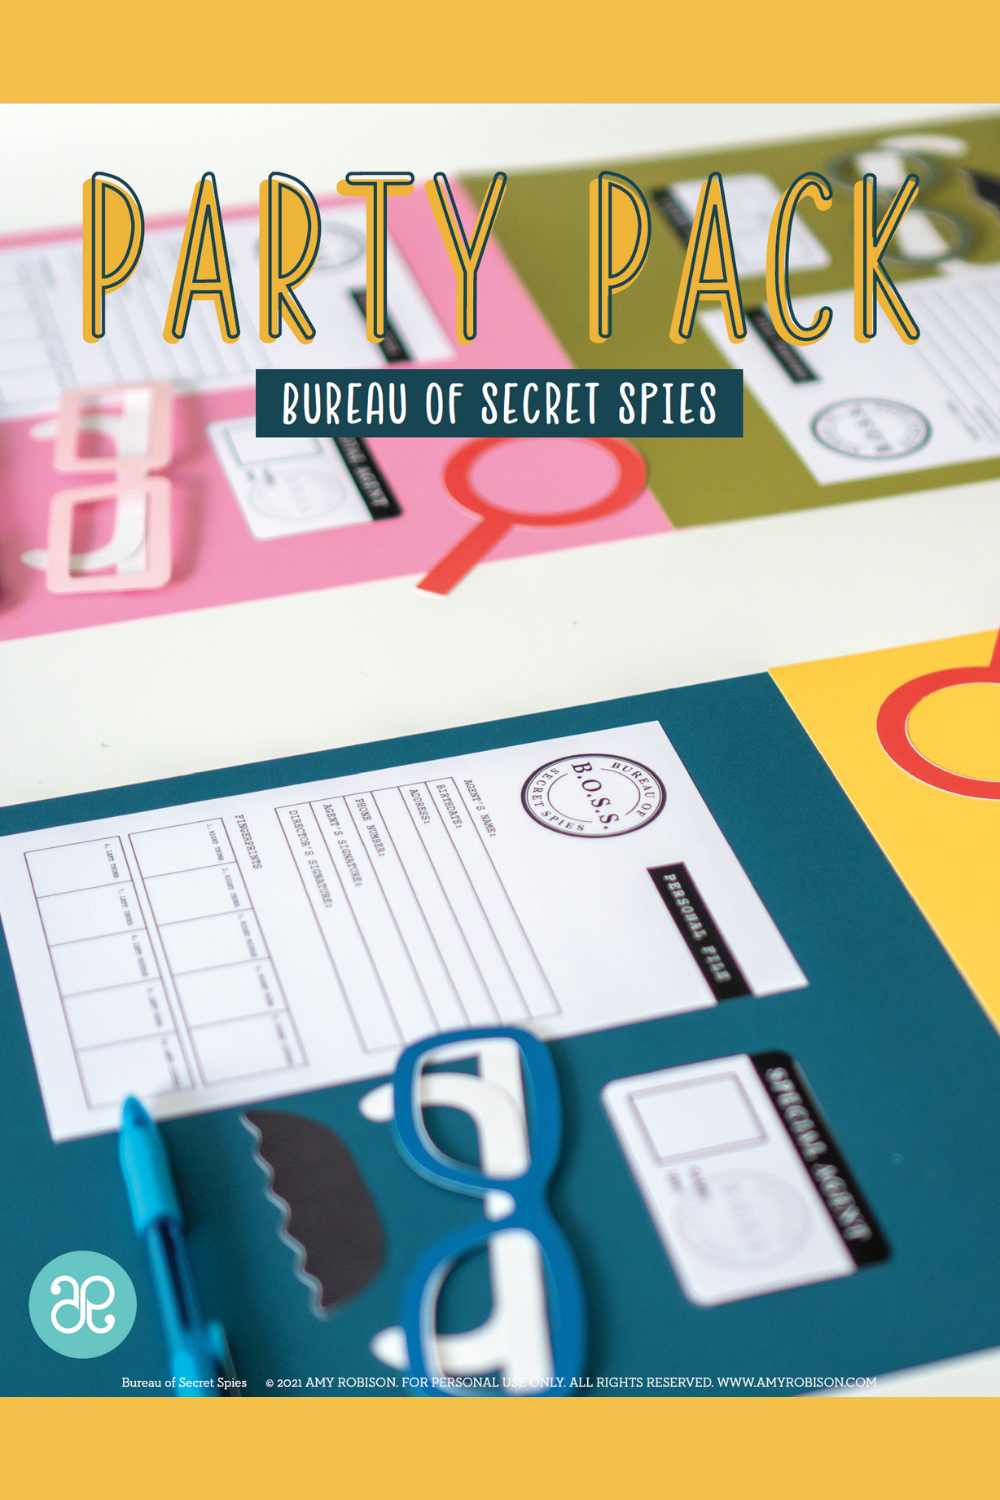 The Bureau of Secret Spies Party Pack has everything you need to host an interactive party or craft night.